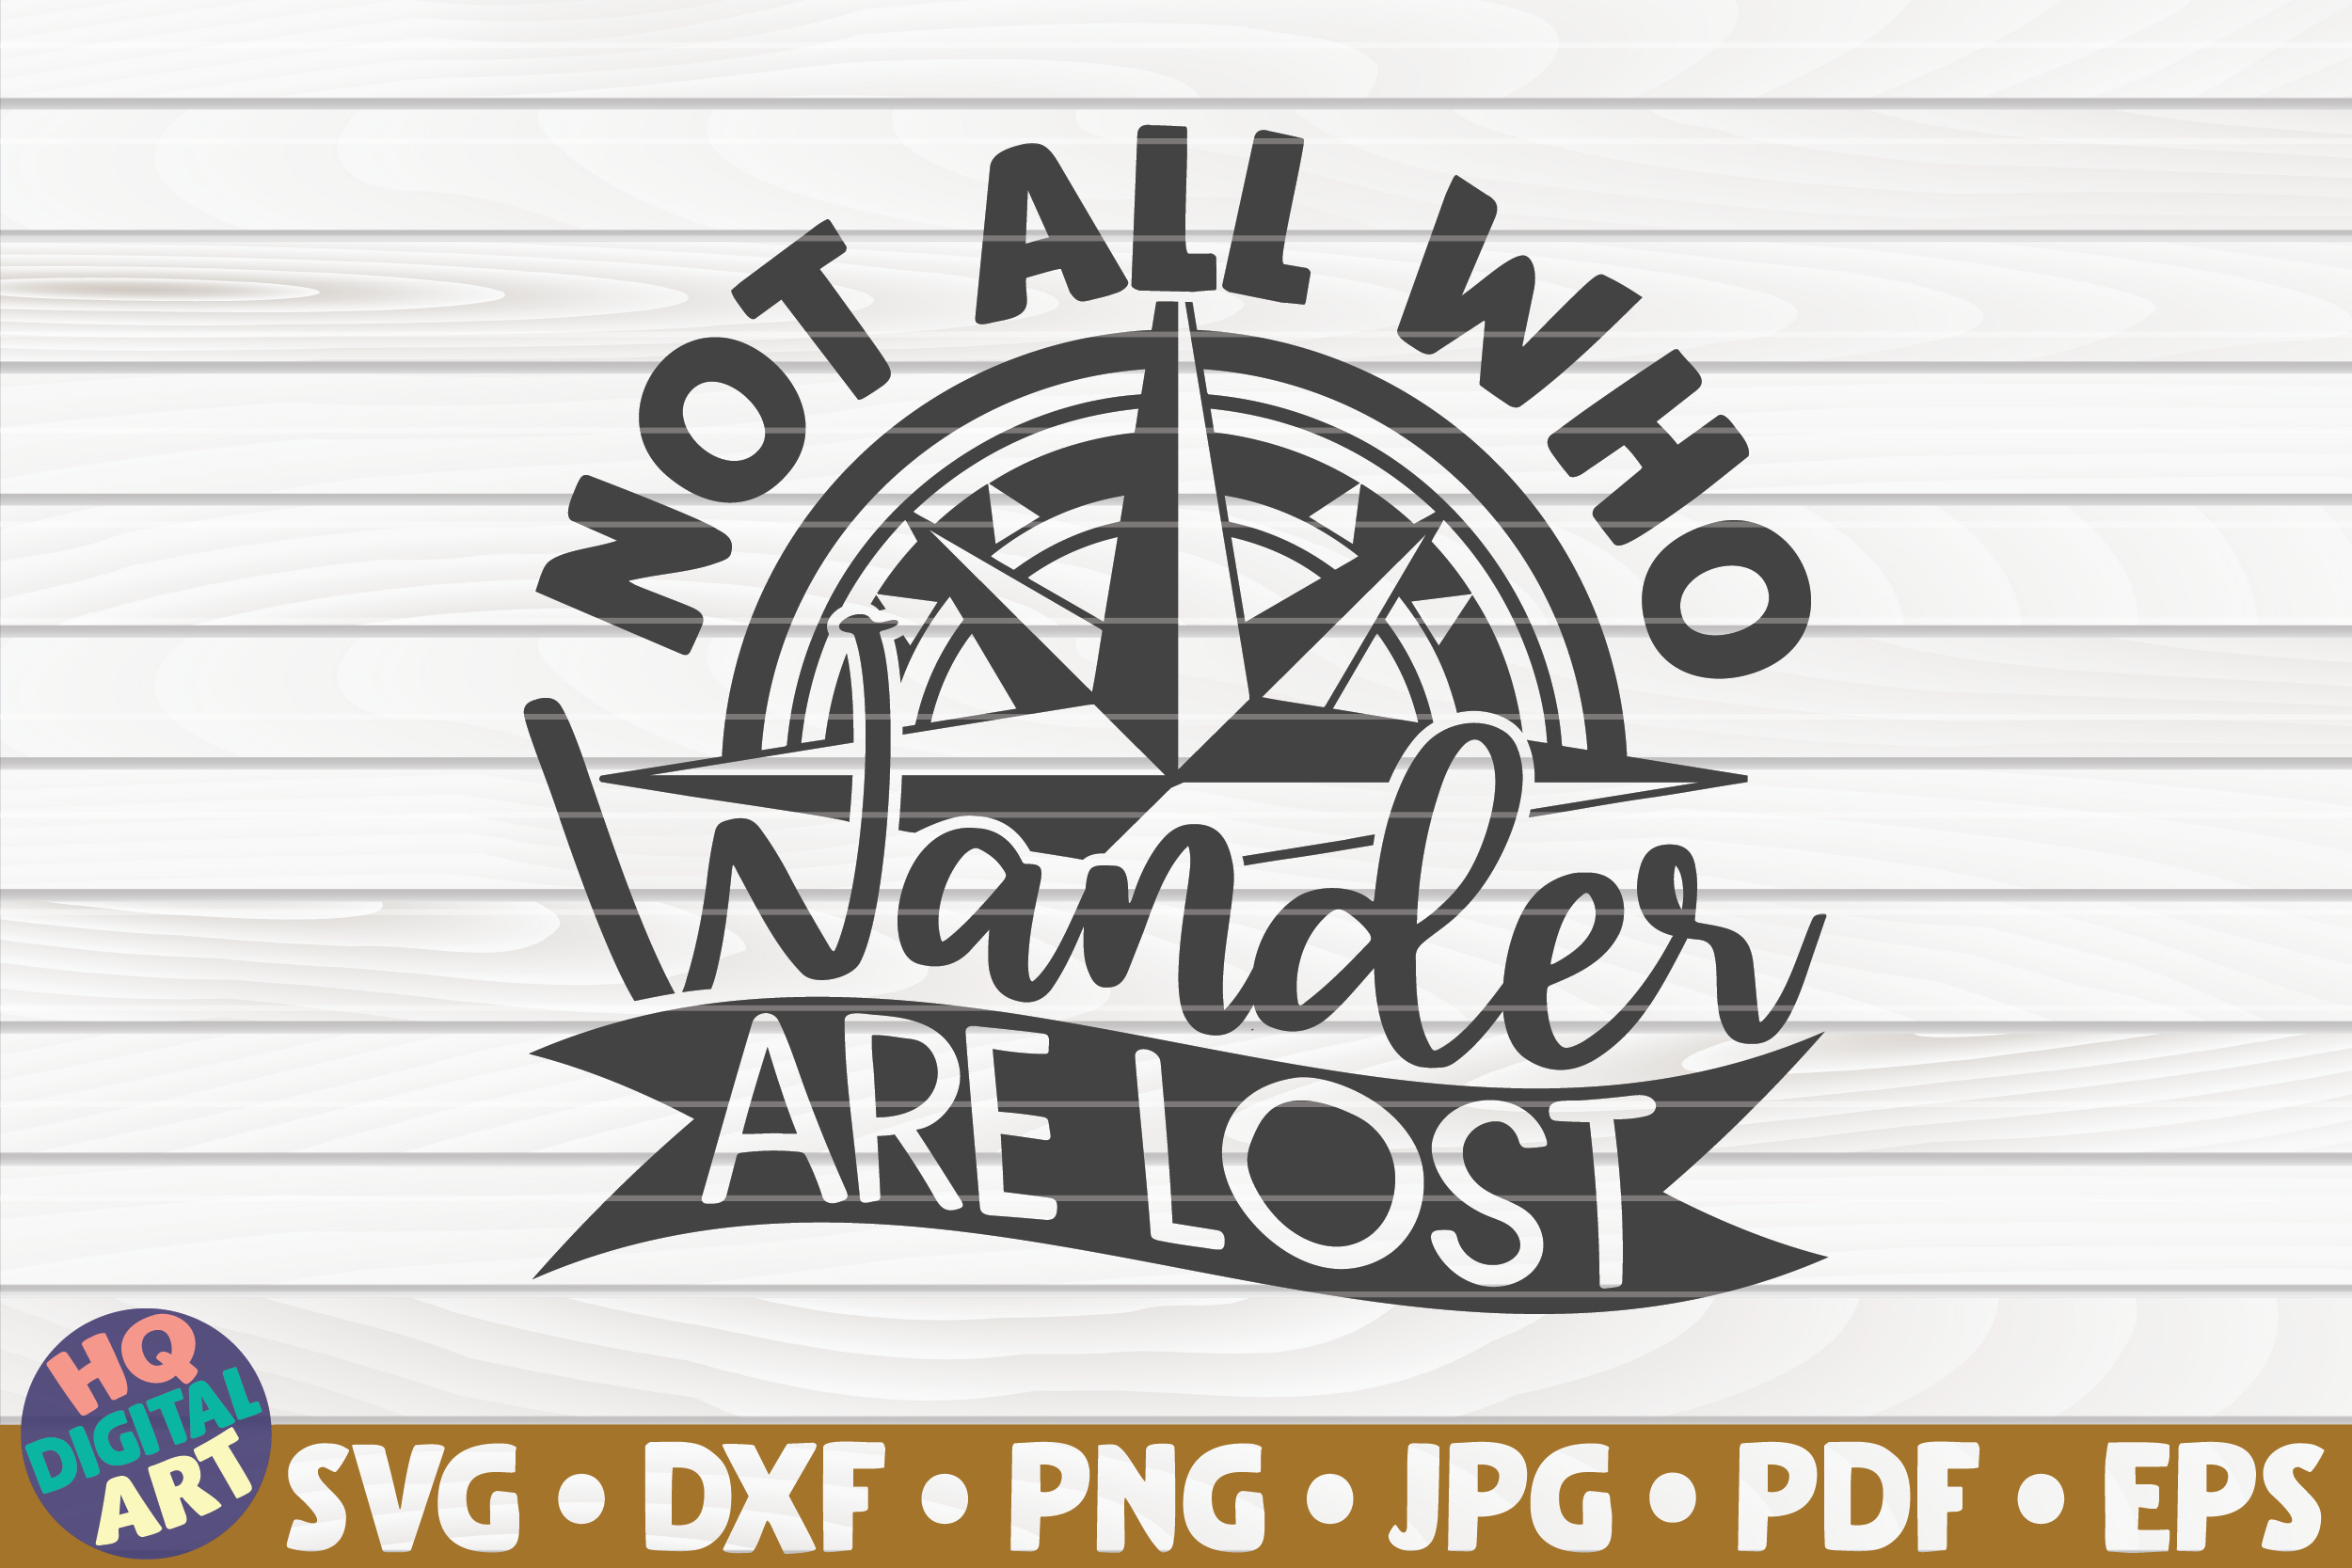 Not all who wander are lost SVG | Travel quote By HQDigitalArt ...